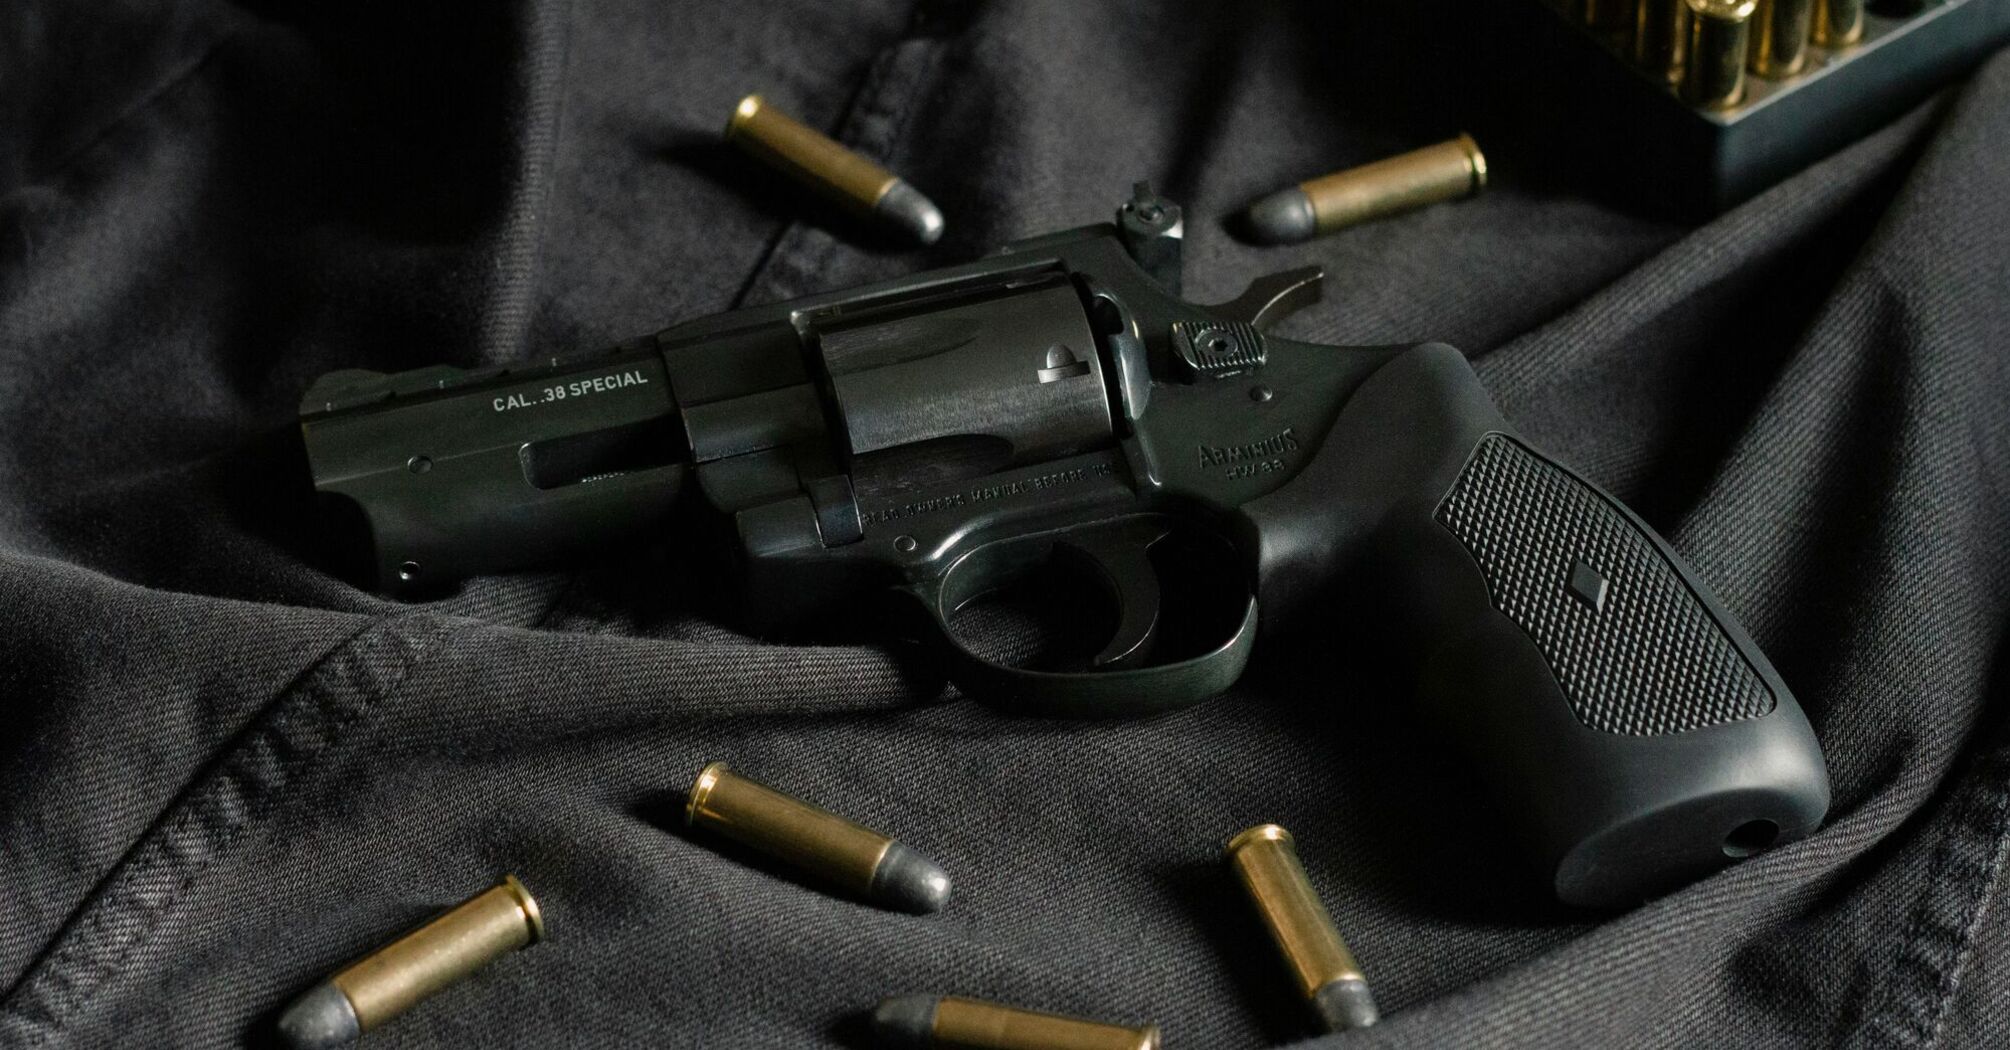 Revolver and bullets on a dark fabric background